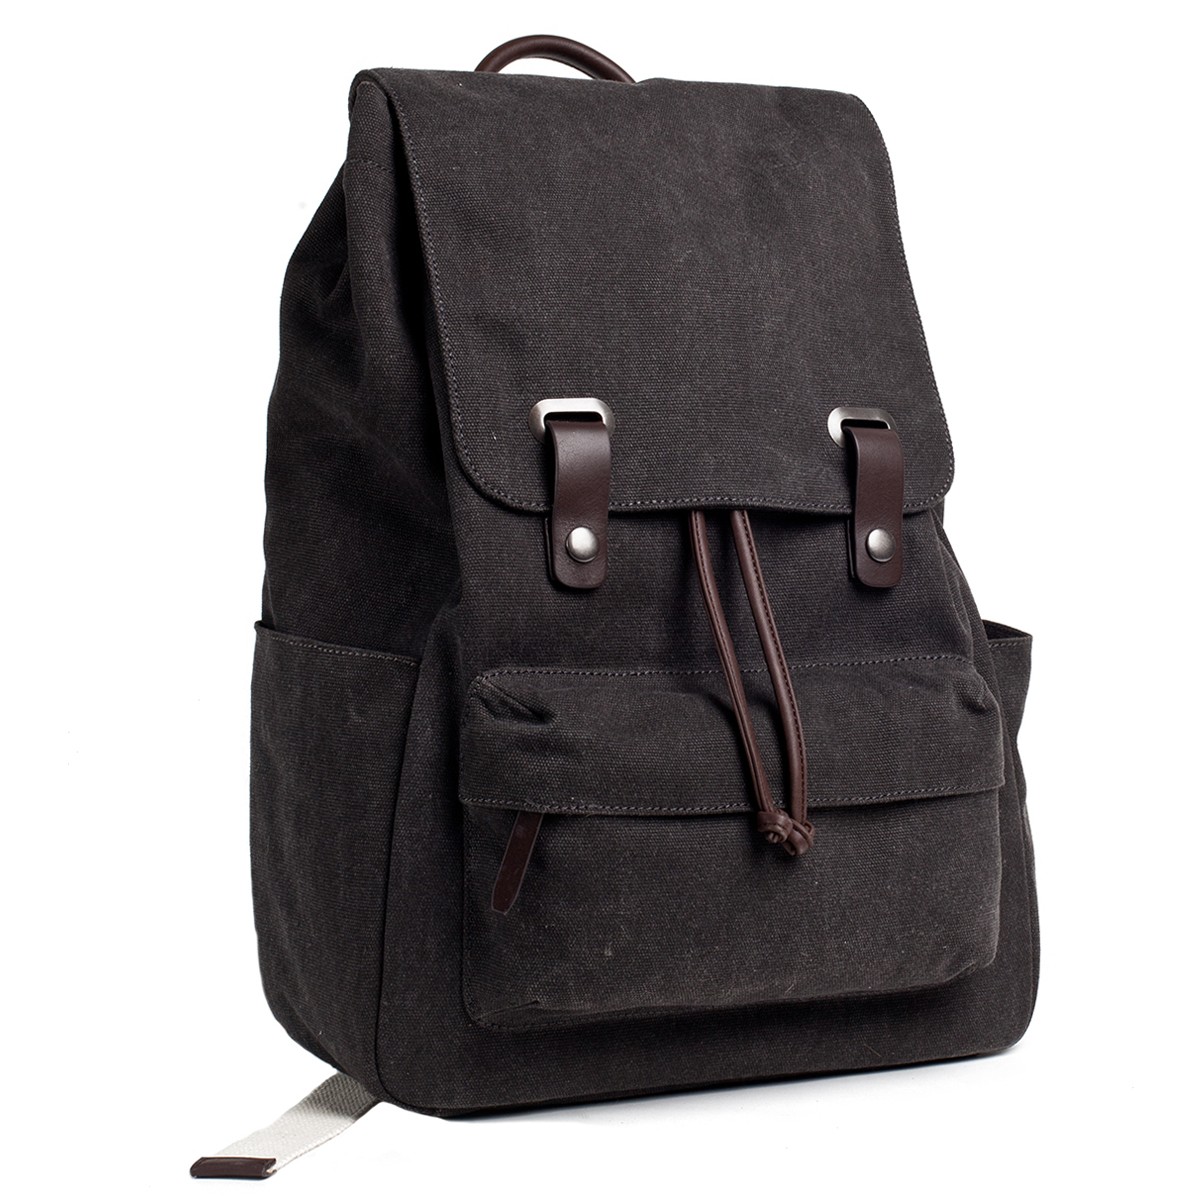 The Canvas Snap Backpack - for him